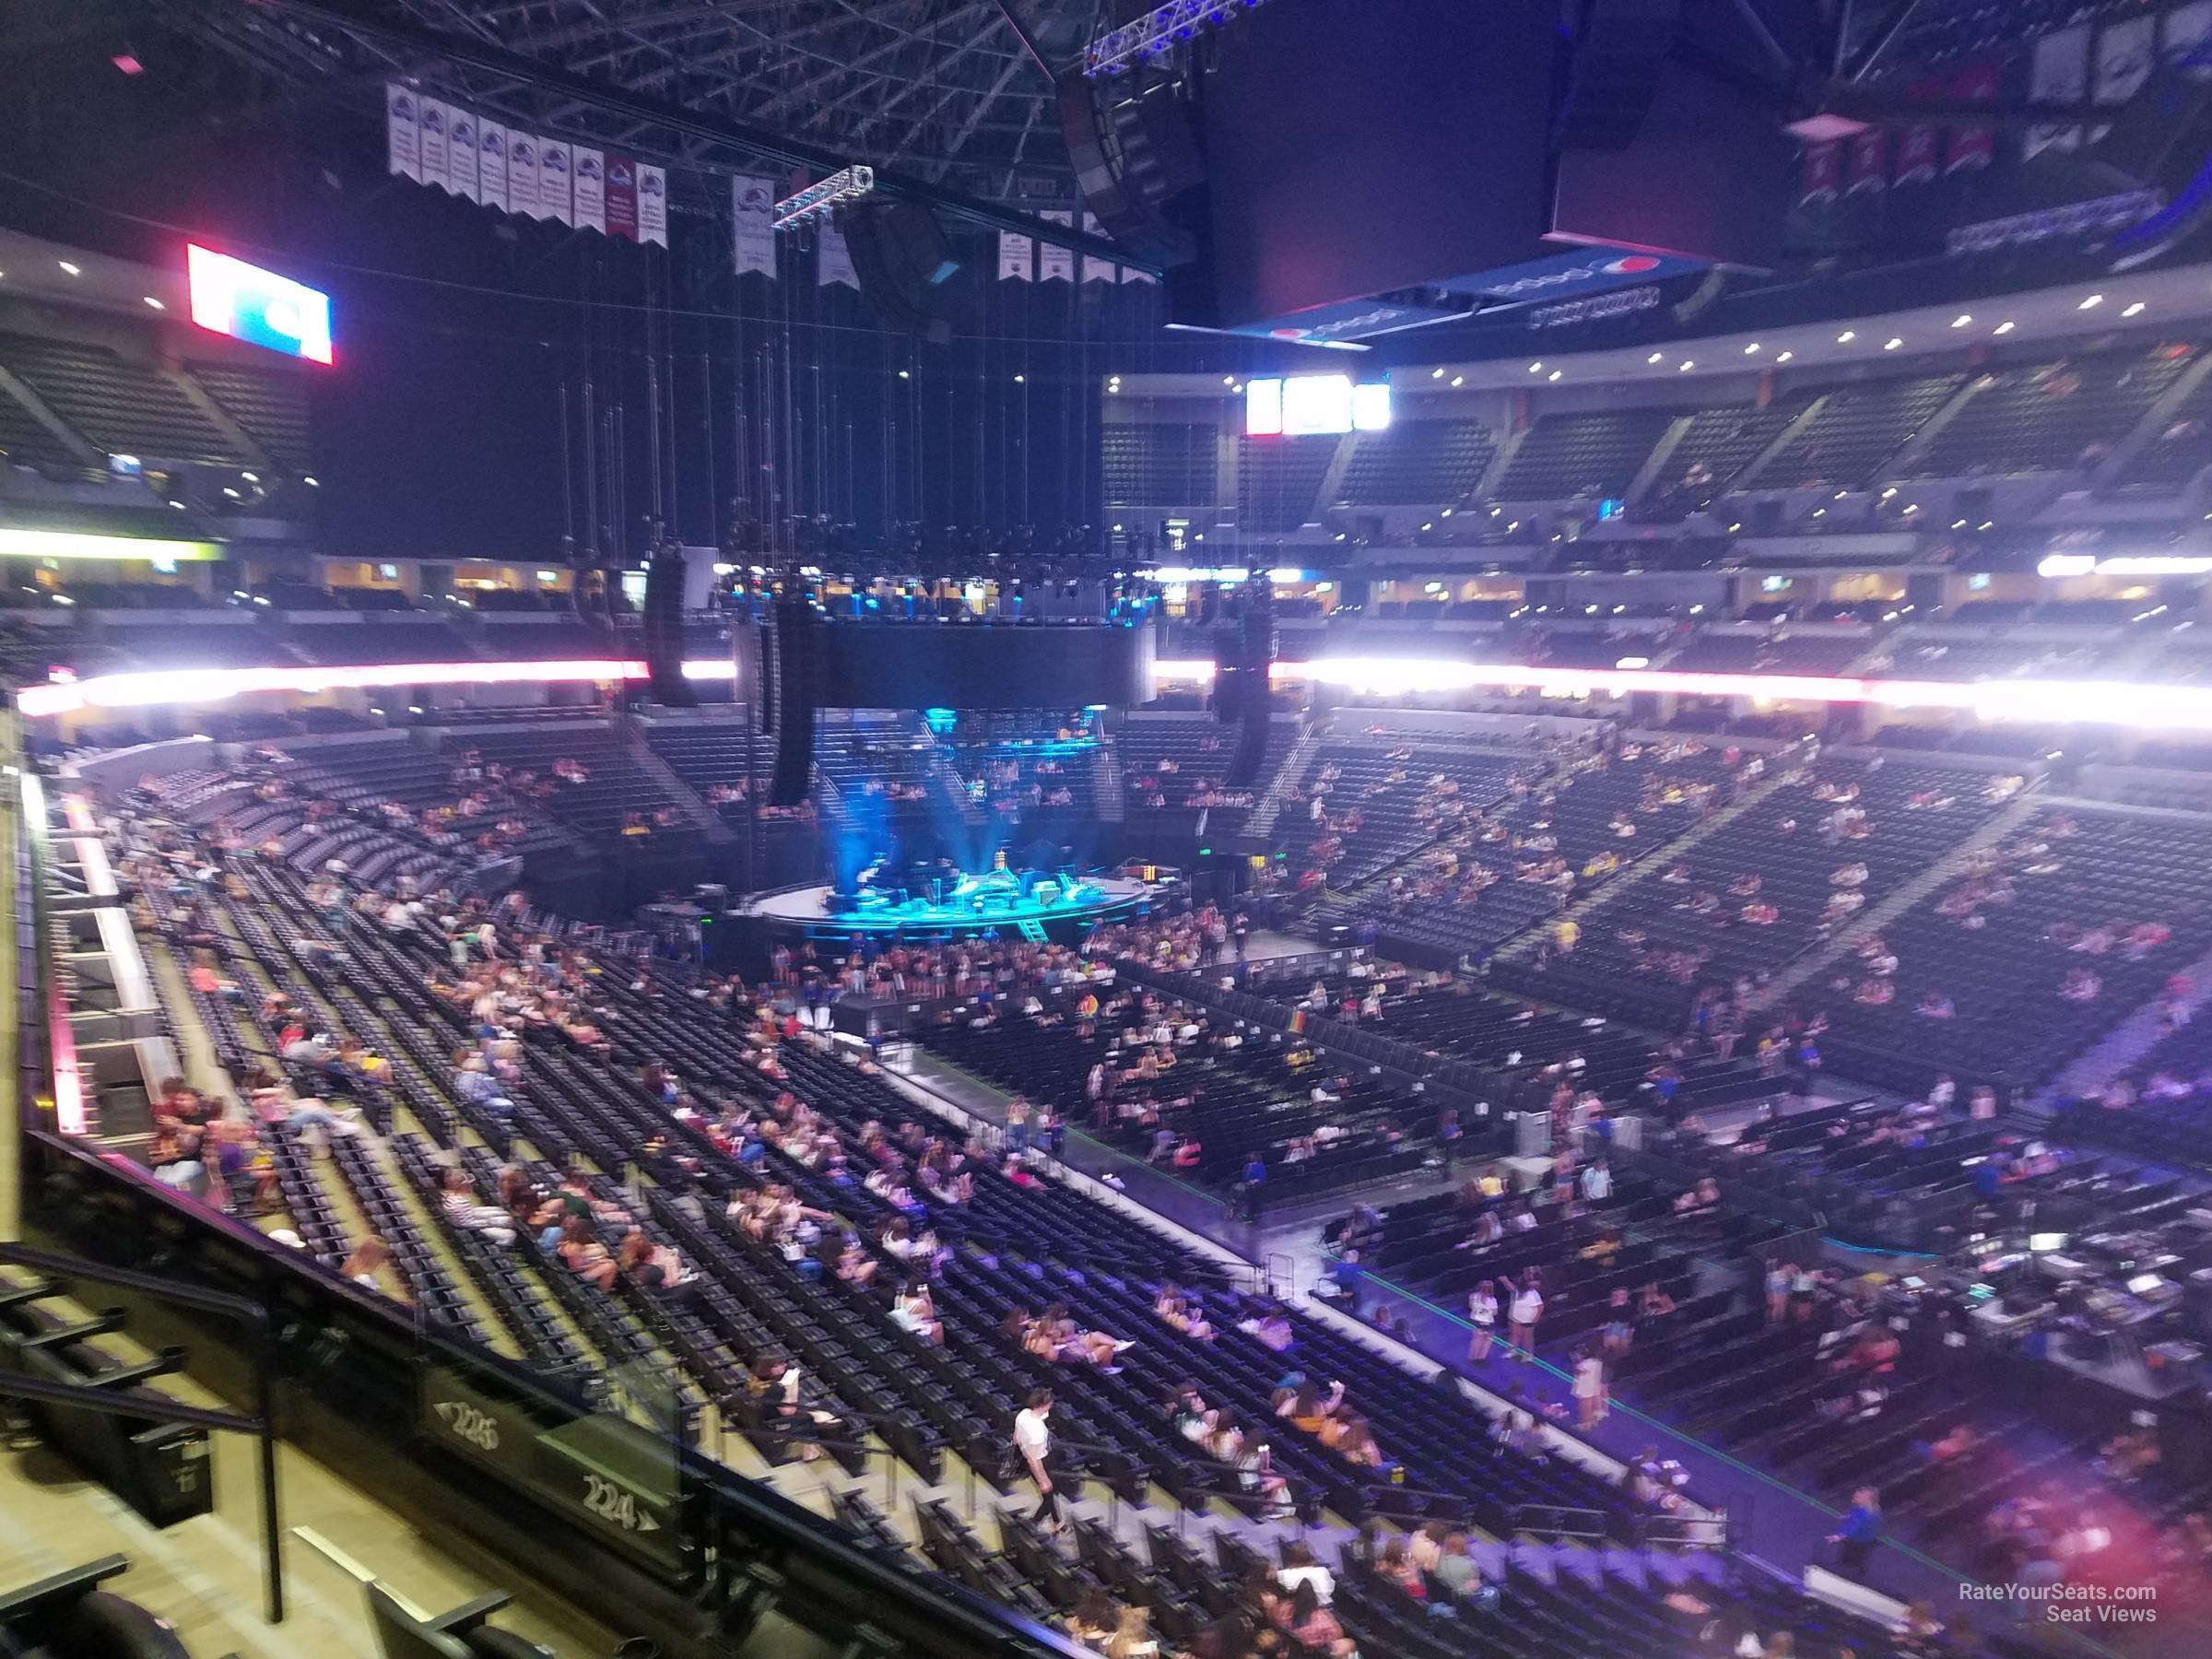 section 224, row 4 seat view  for concert - ball arena